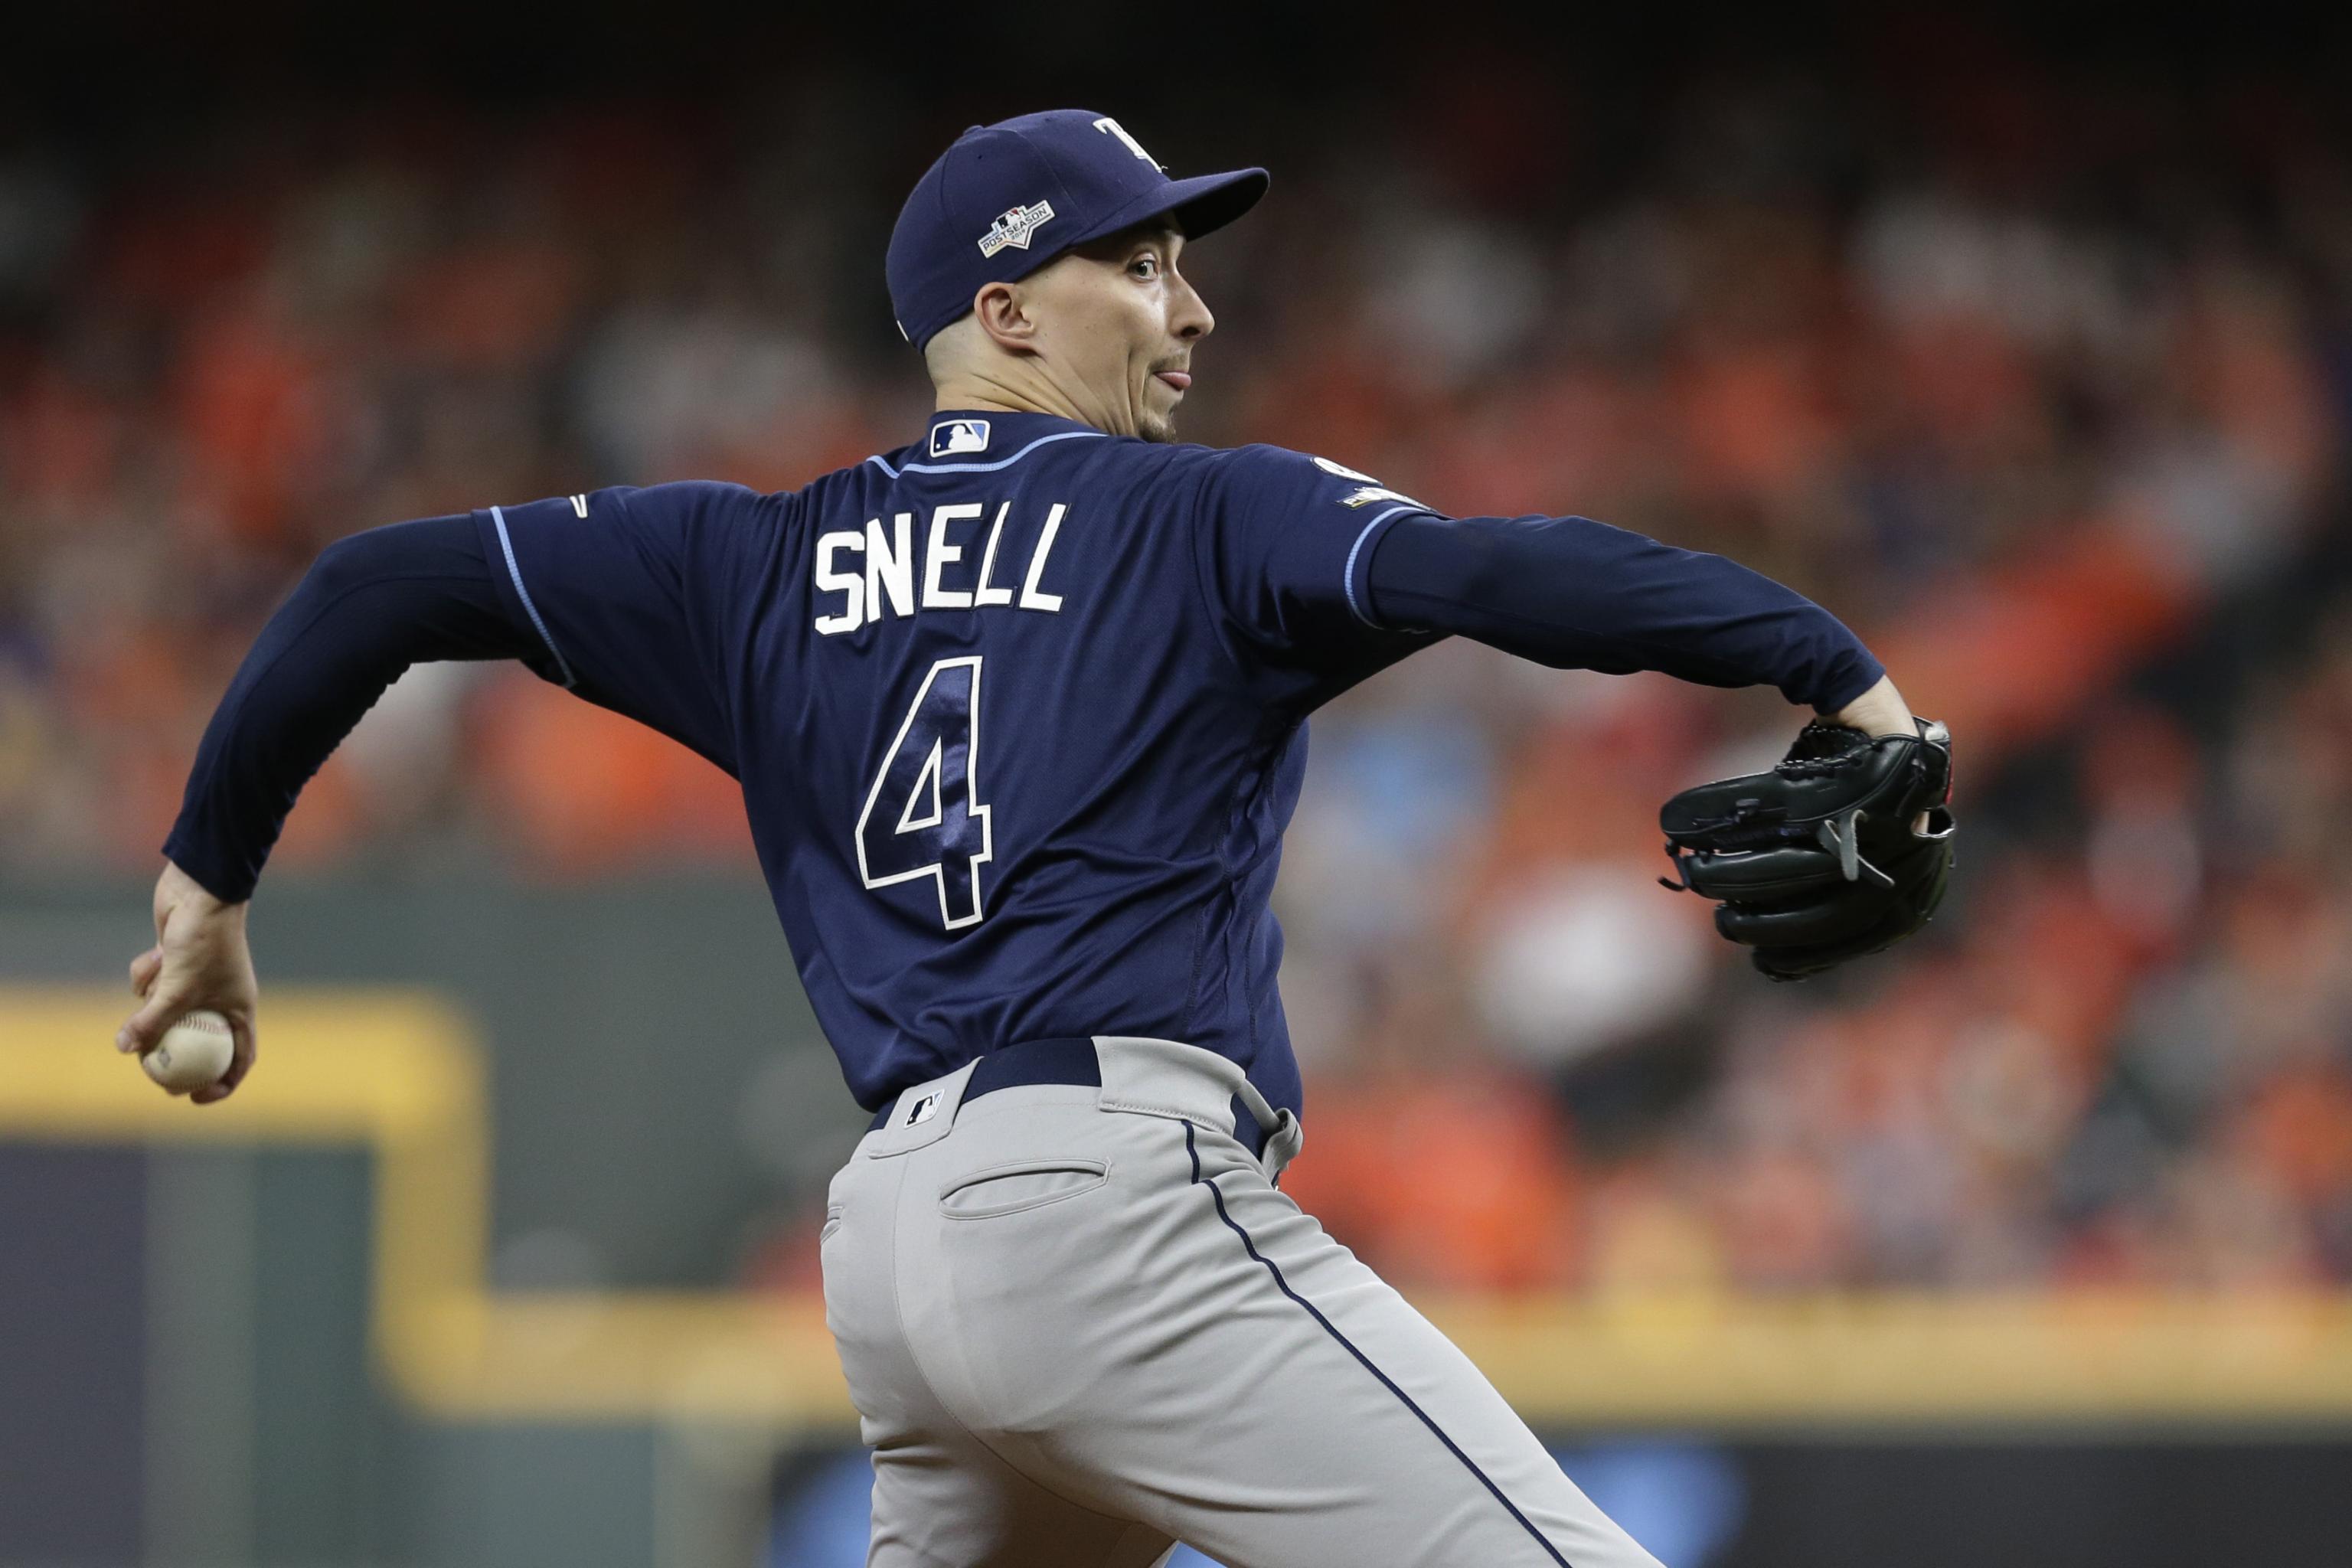 Tampa Bay Rays ace Blake Snell traded to San Diego Padres, shaking